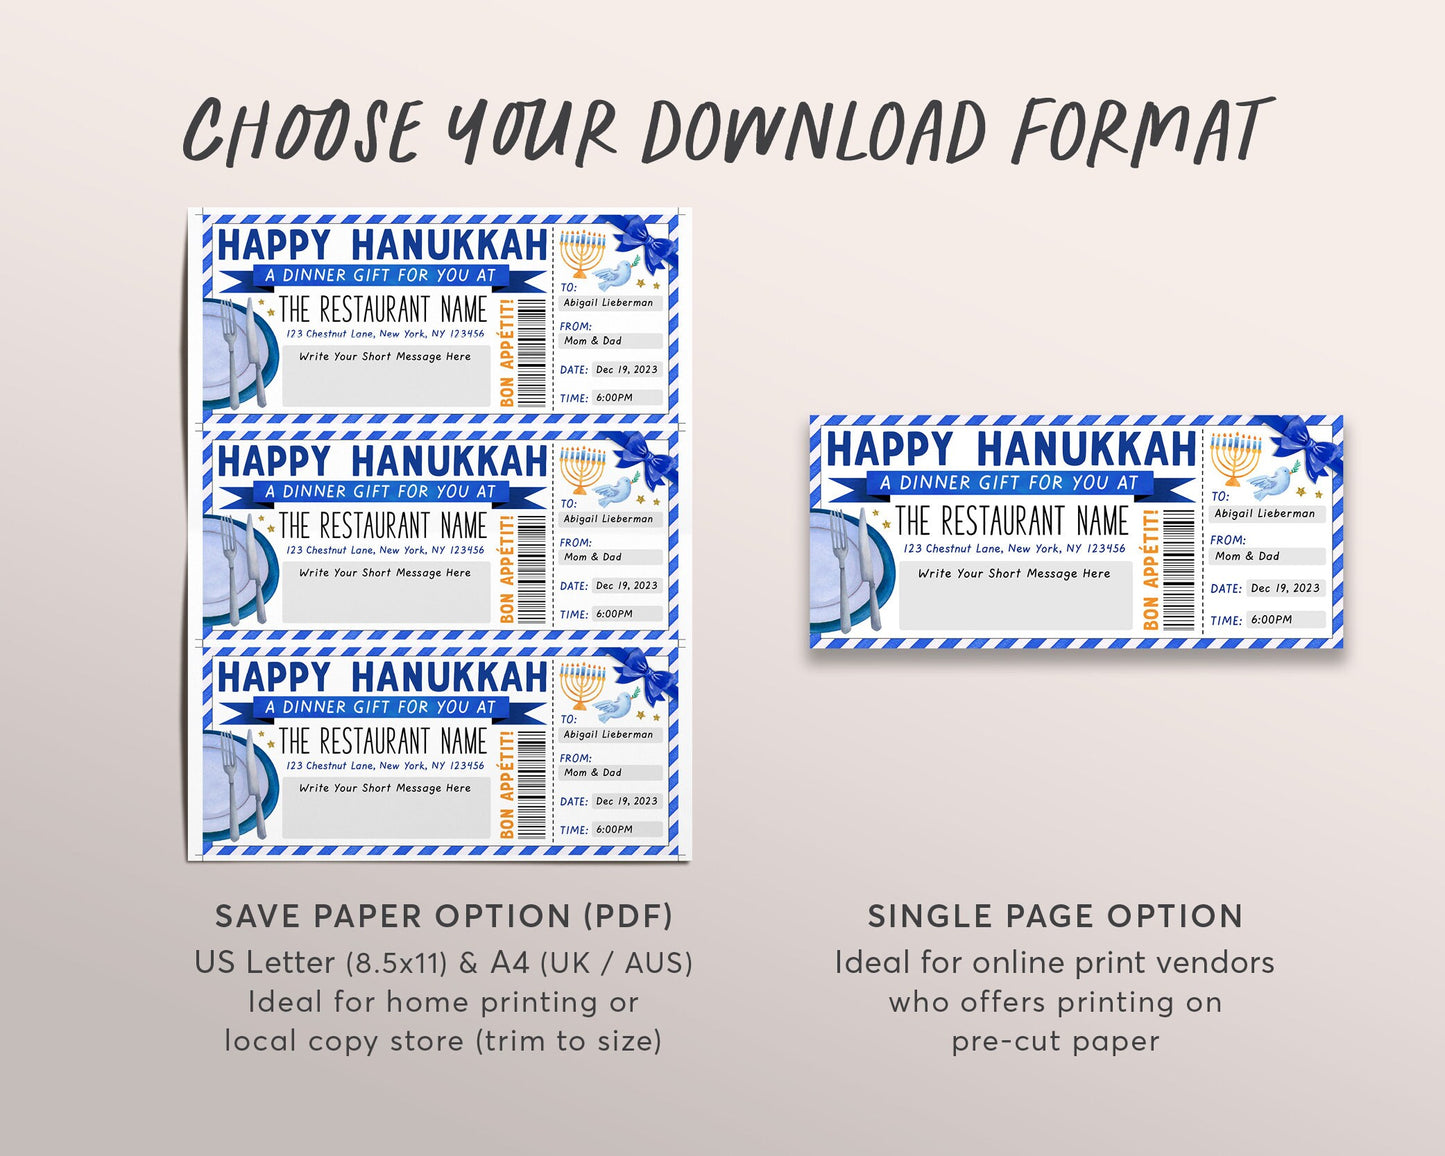 Happy Hanukkah Restaurant Gift Voucher Editable Template, Surprise Chanukah Dinner Date Gift Certificate Printable, Dining Night Out Coupon